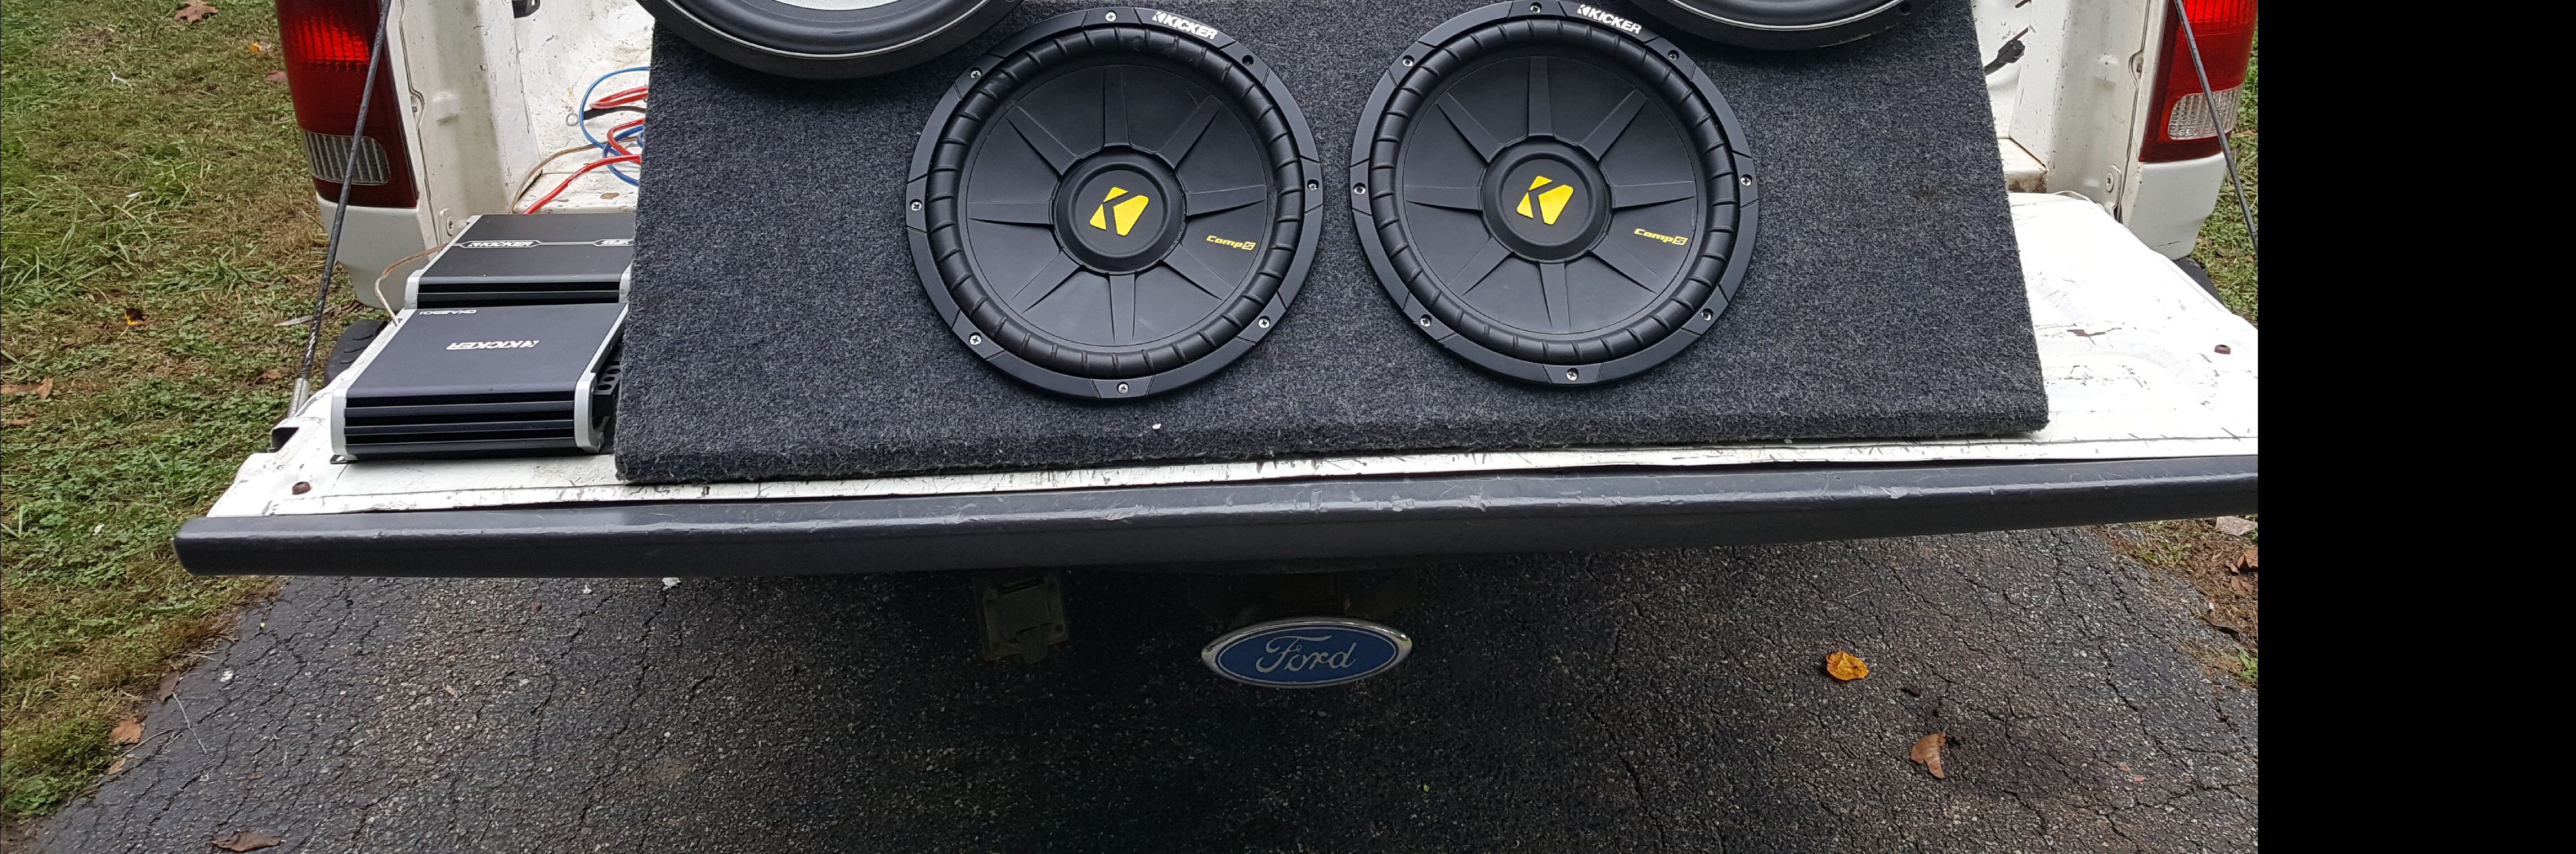 Kicker comp subs and amps